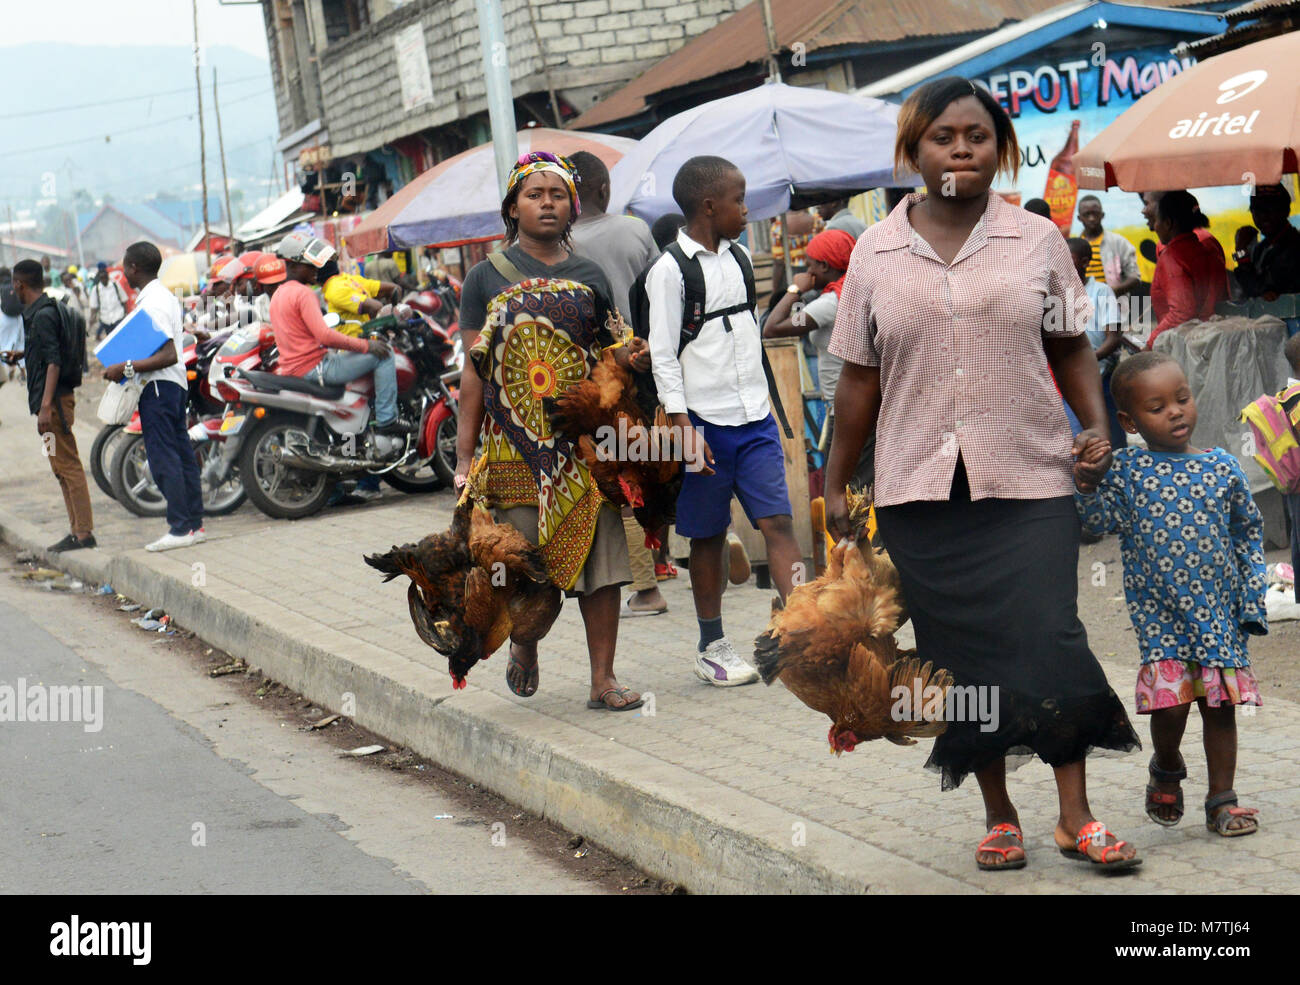 Congolese women holding chickens in Goma, D.R.C Stock Photo